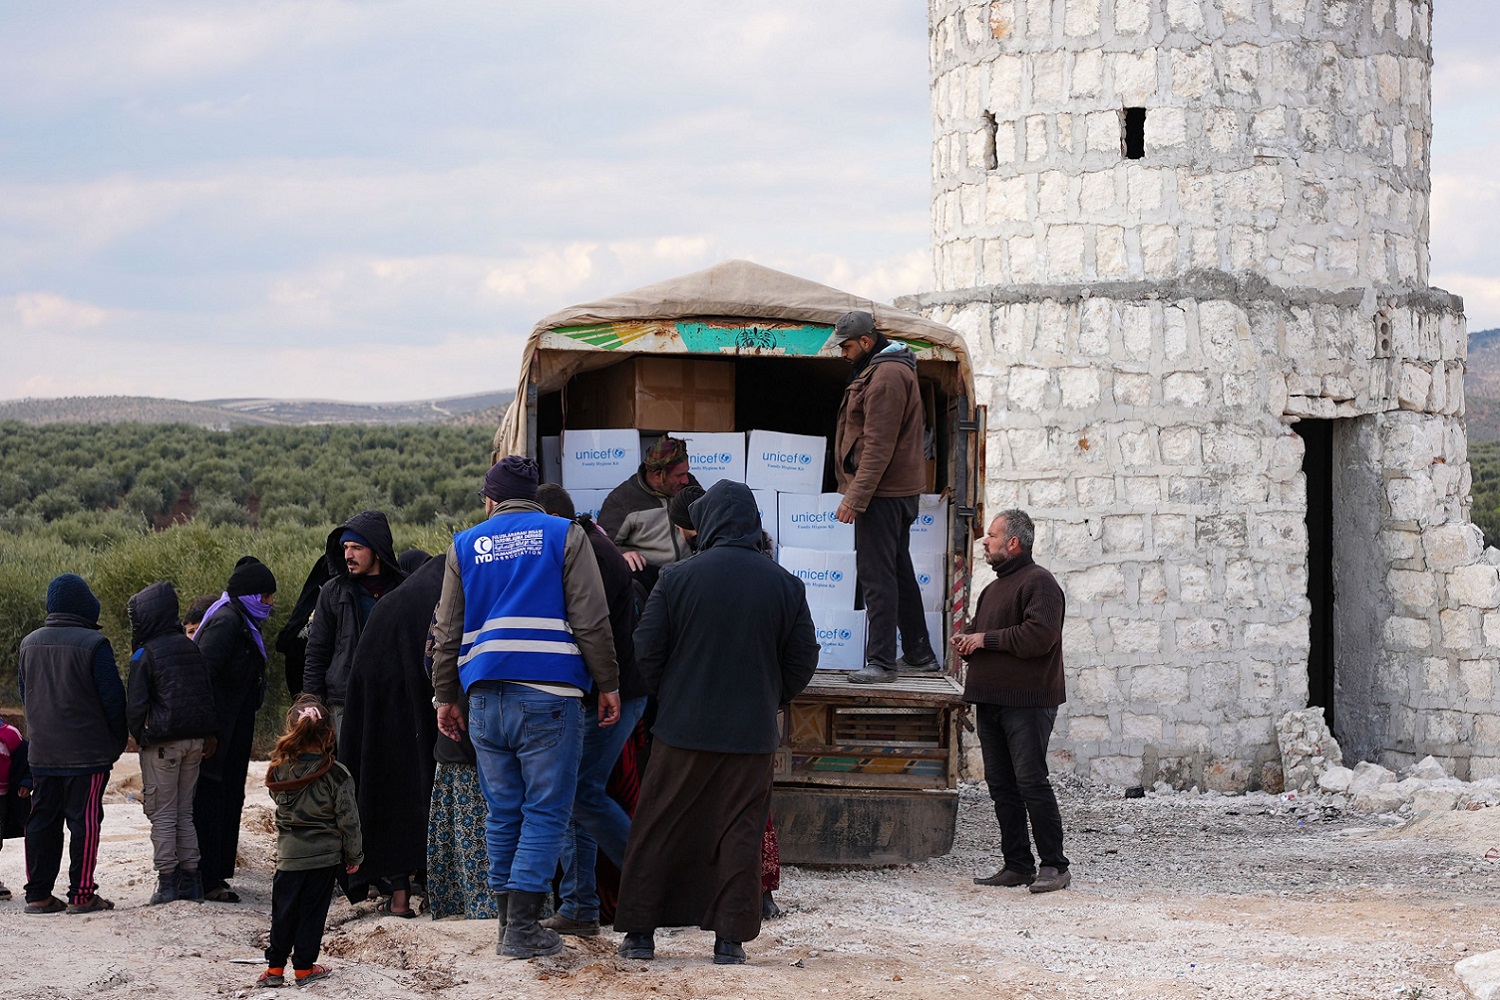 Humanitarian aid and peace in Syria: An intricate relationship